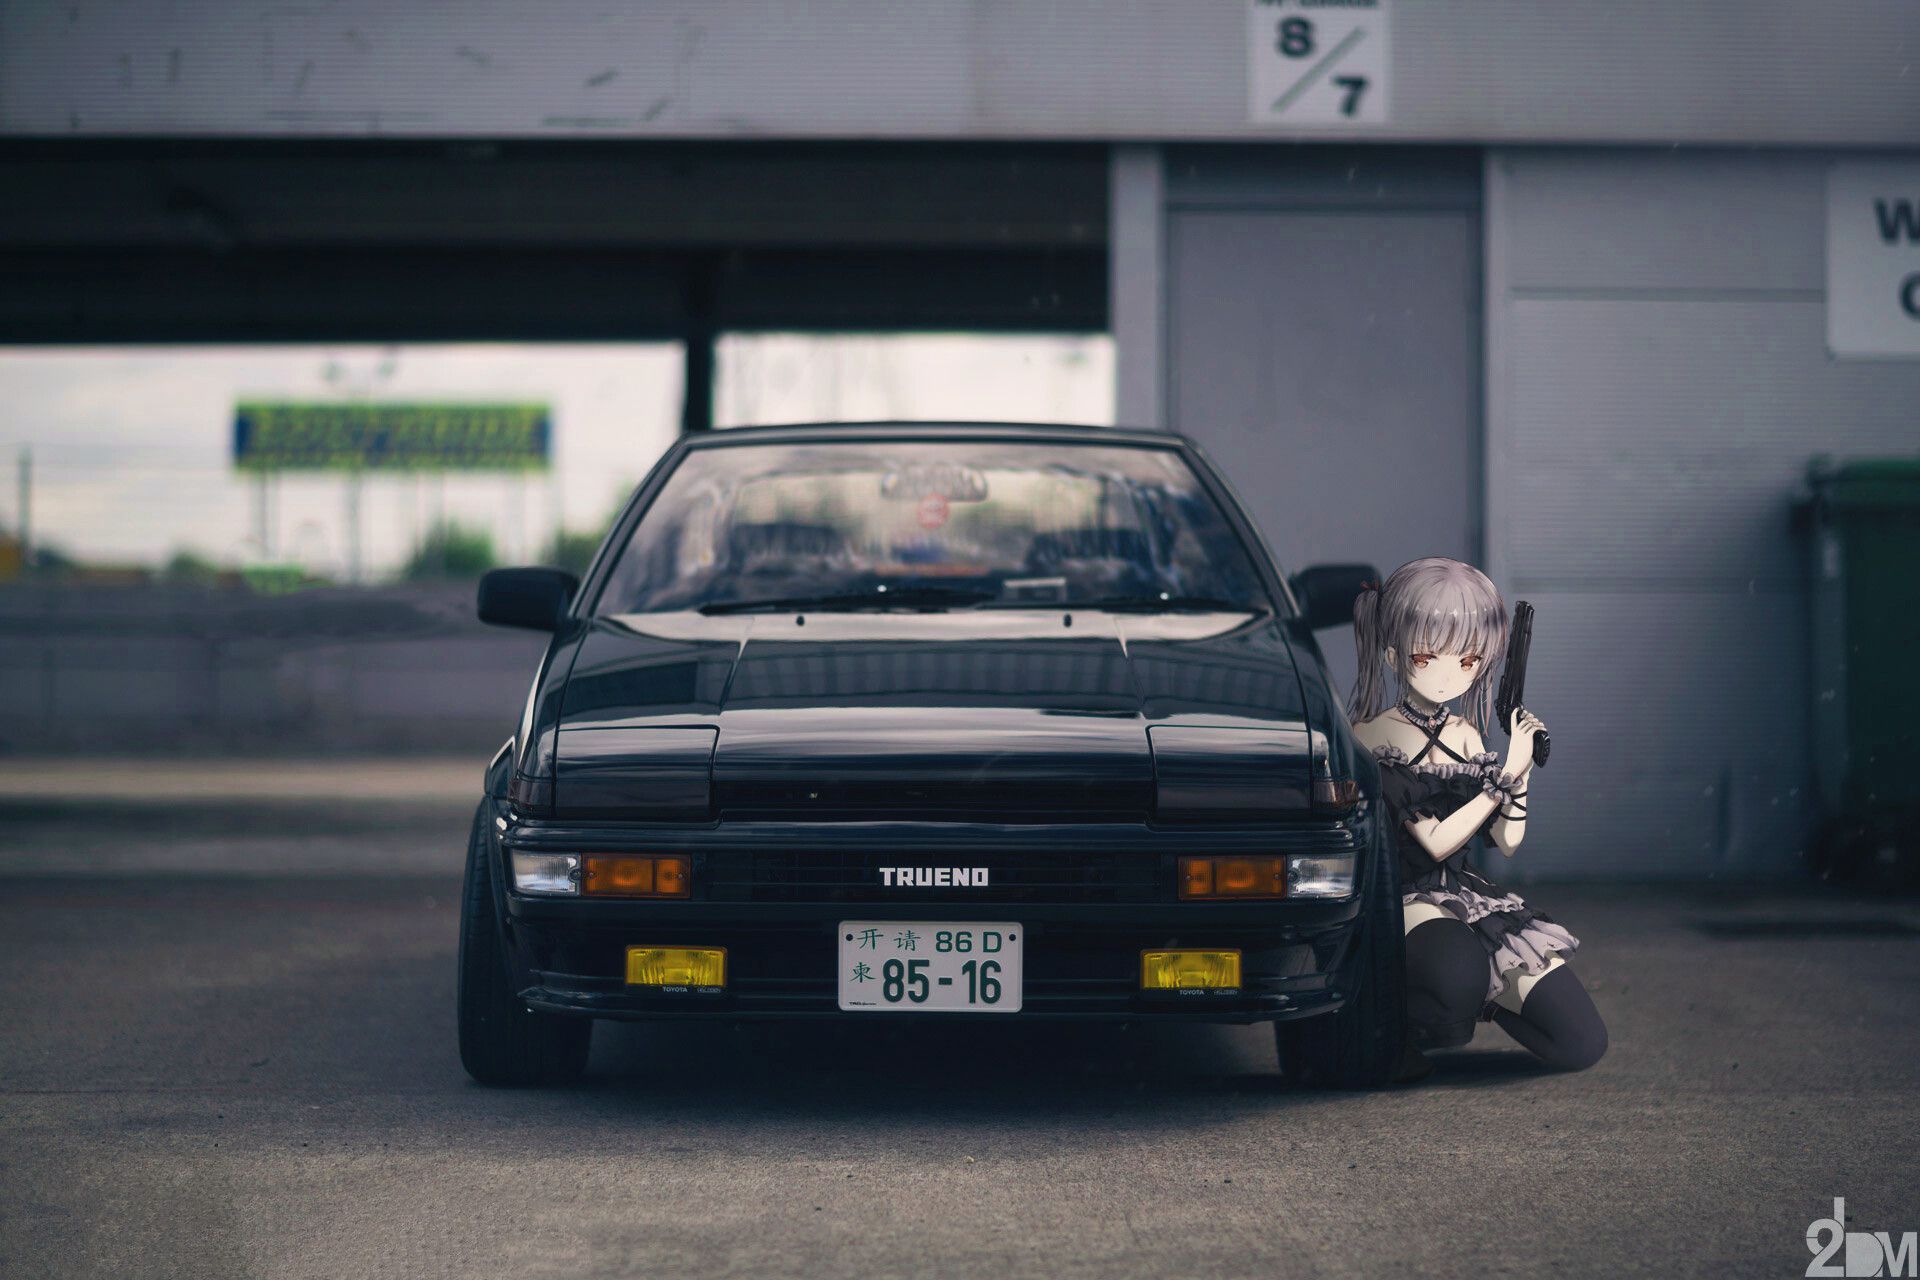 A girl with a gun kneeling in front of a car - Toyota AE86